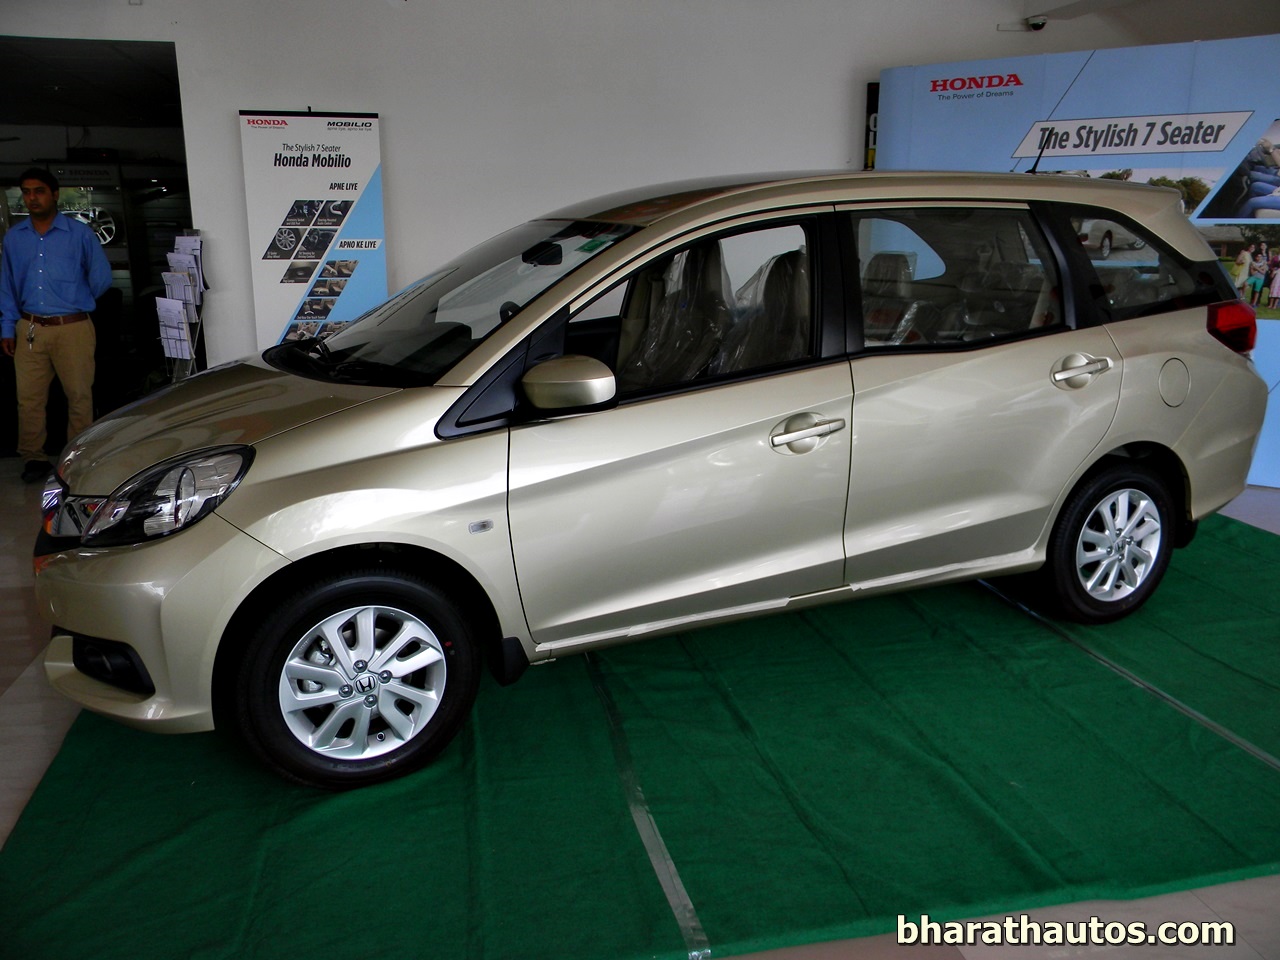 Honda Cars India Launched The 7 Seater Honda Mobilio Mpv At Rs